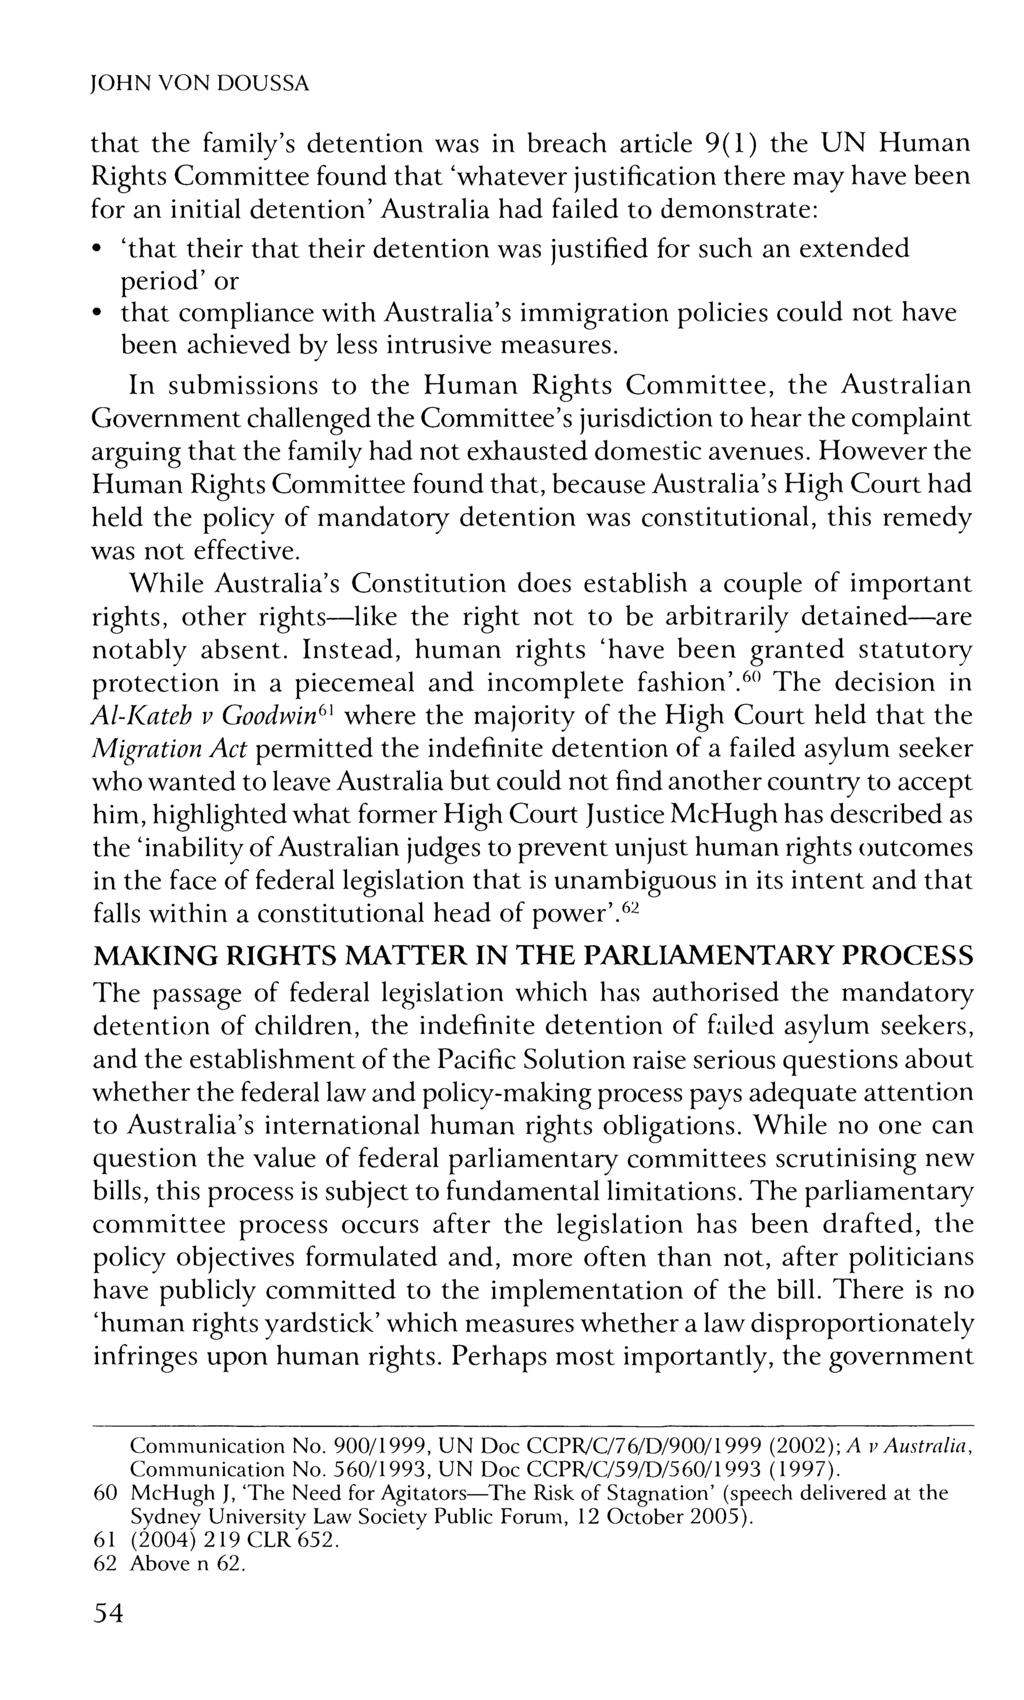 JOHN VON DOUSSA that the family s detention was in breach article 9(1) the UN Human Rights Committee found that whatever justification there may have been for an initial detention Australia had